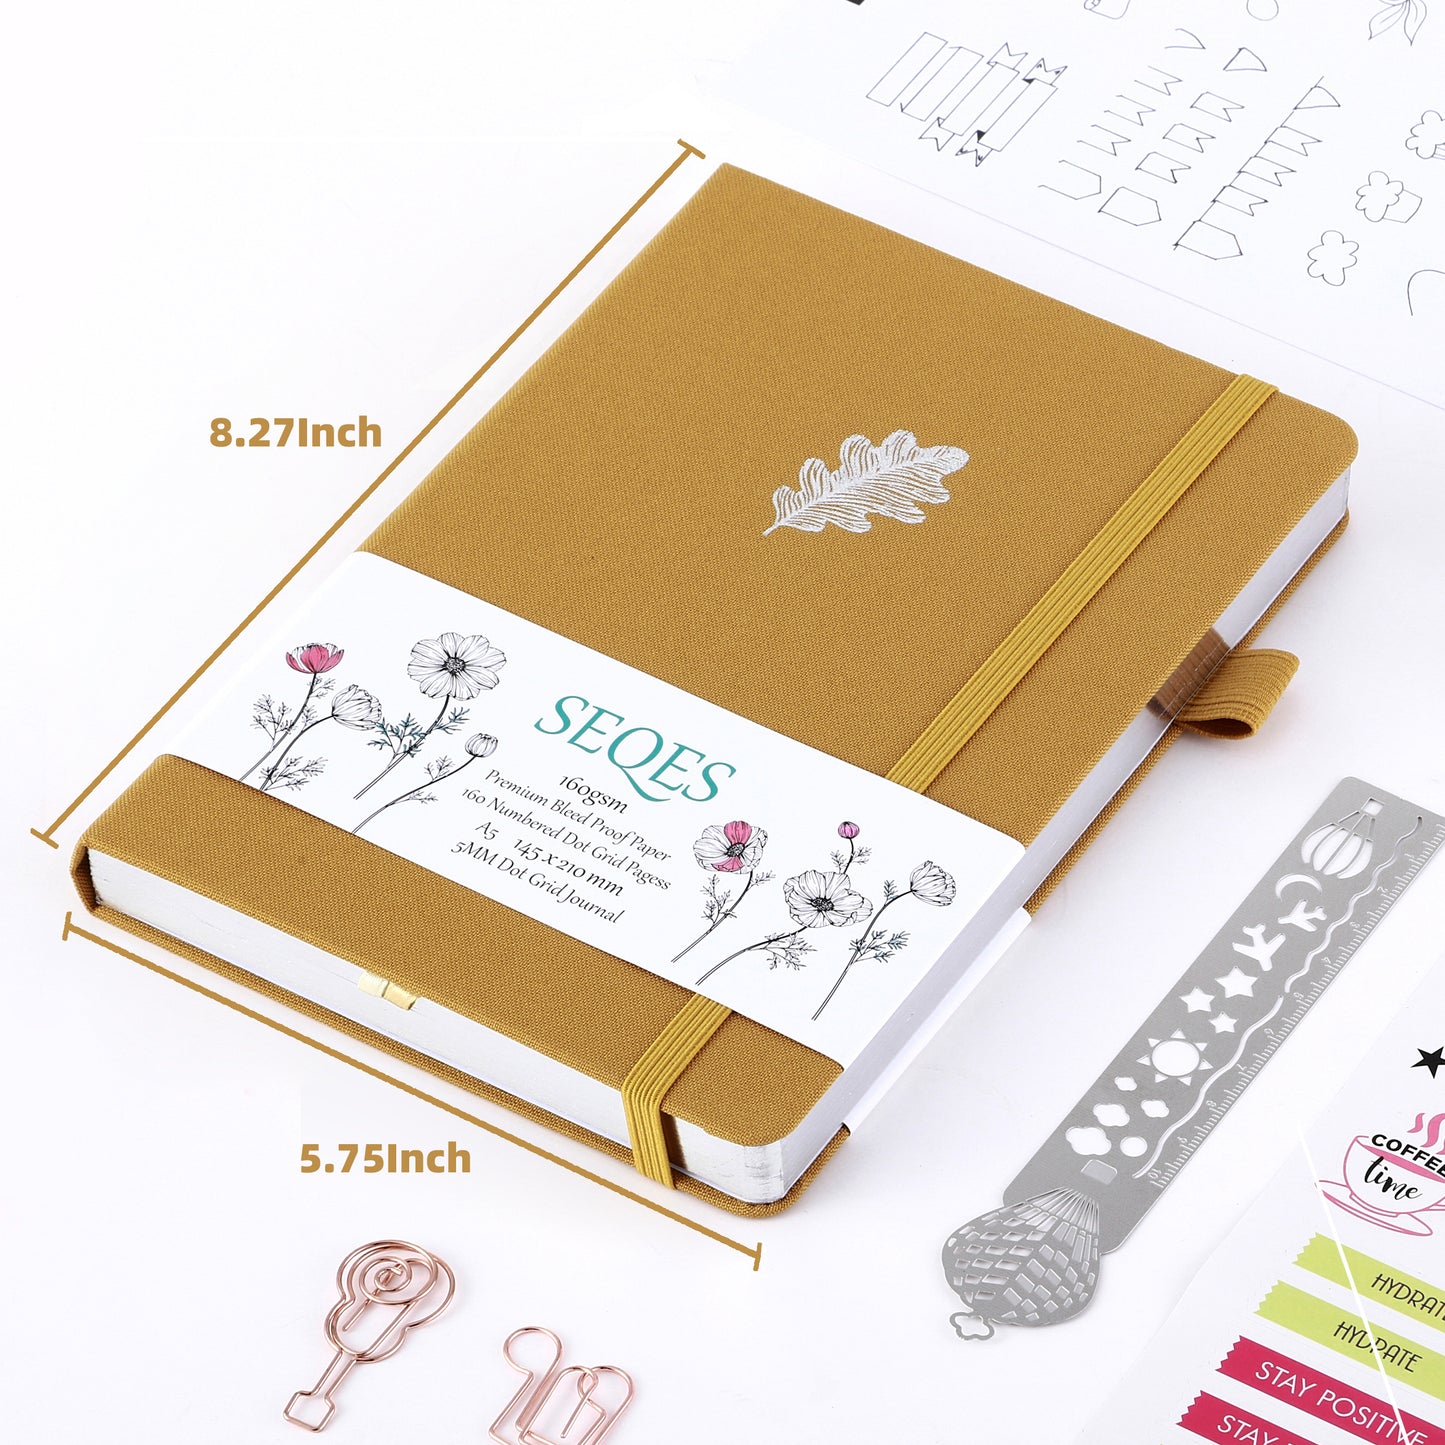 Bullet Journal A5 160gsm PREMIUM paper gold edge-blooming flower